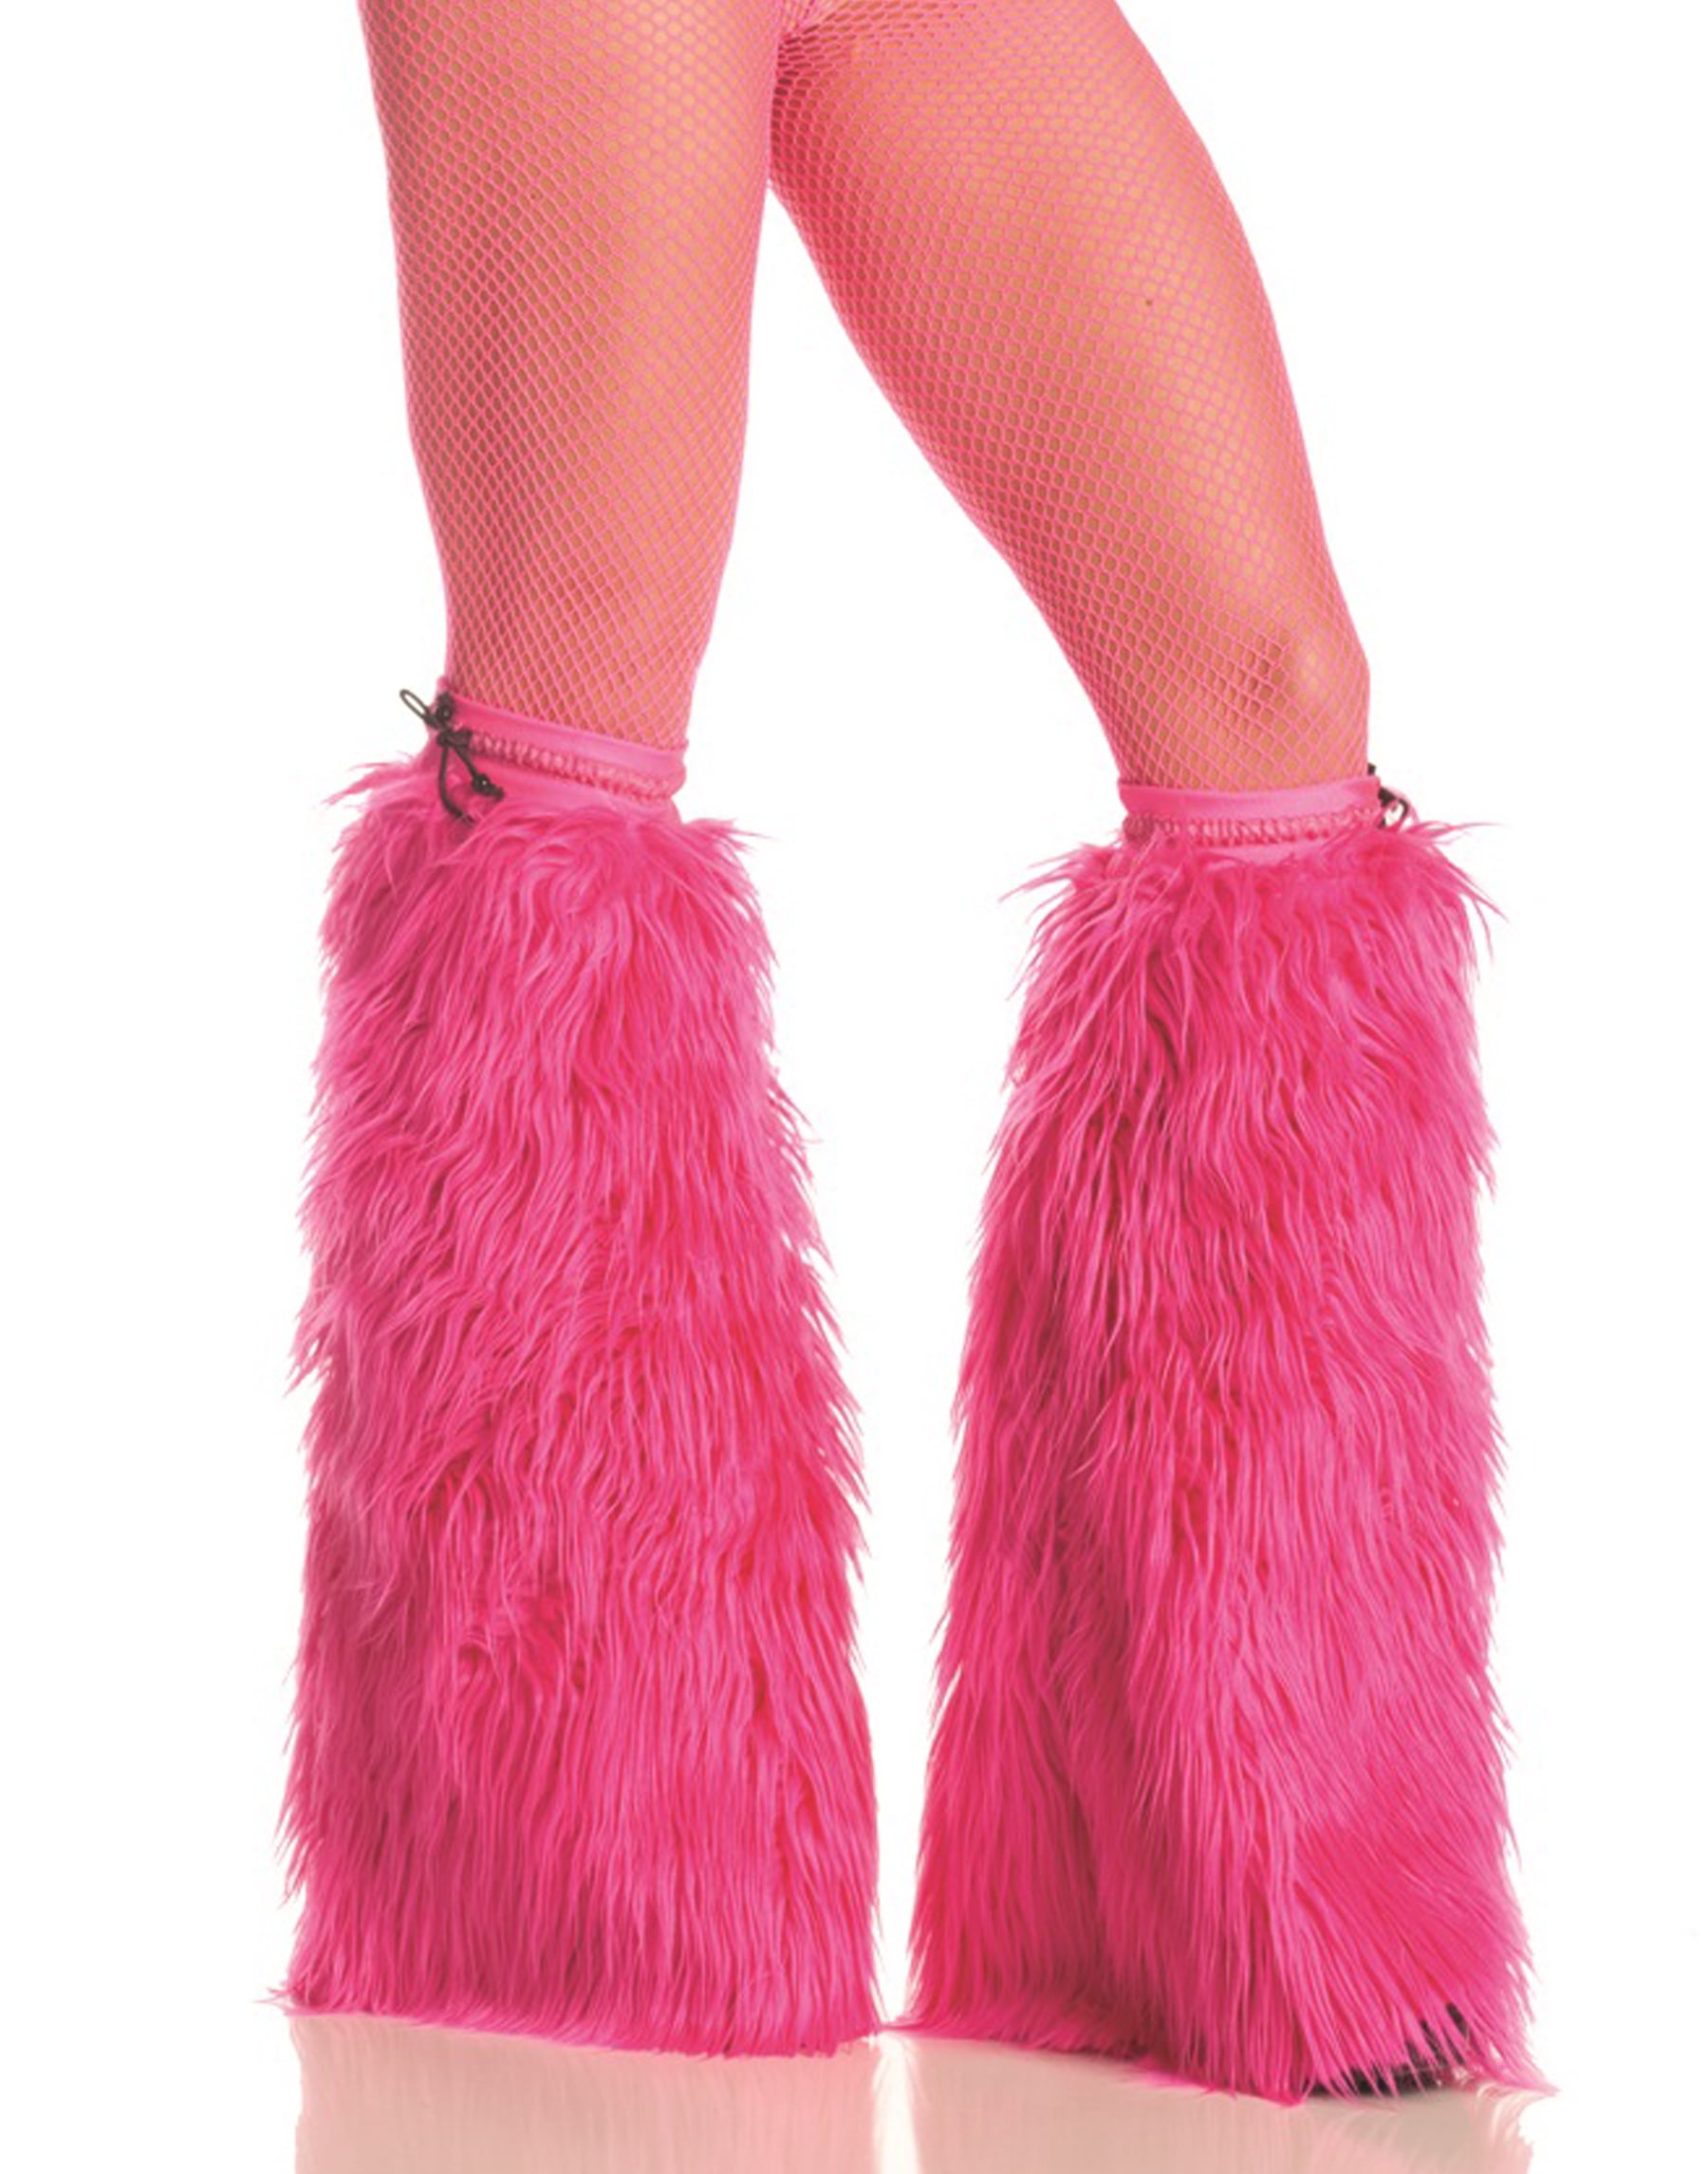 pink boot covers